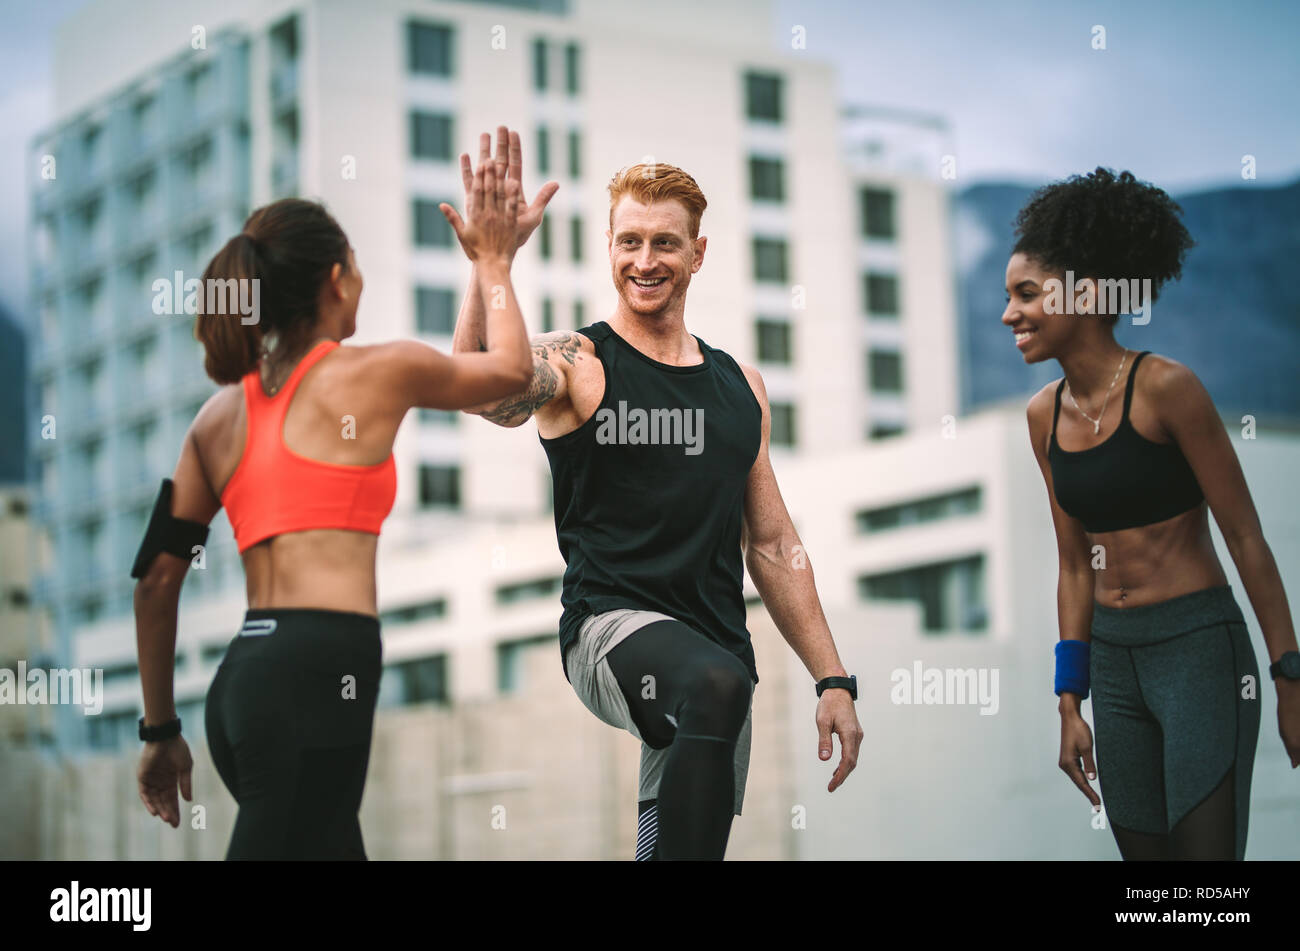 Female athlete giving high five to a man after fitness training standing on rooftop. fitness man and women in cheerful mood giving high five. Stock Photo